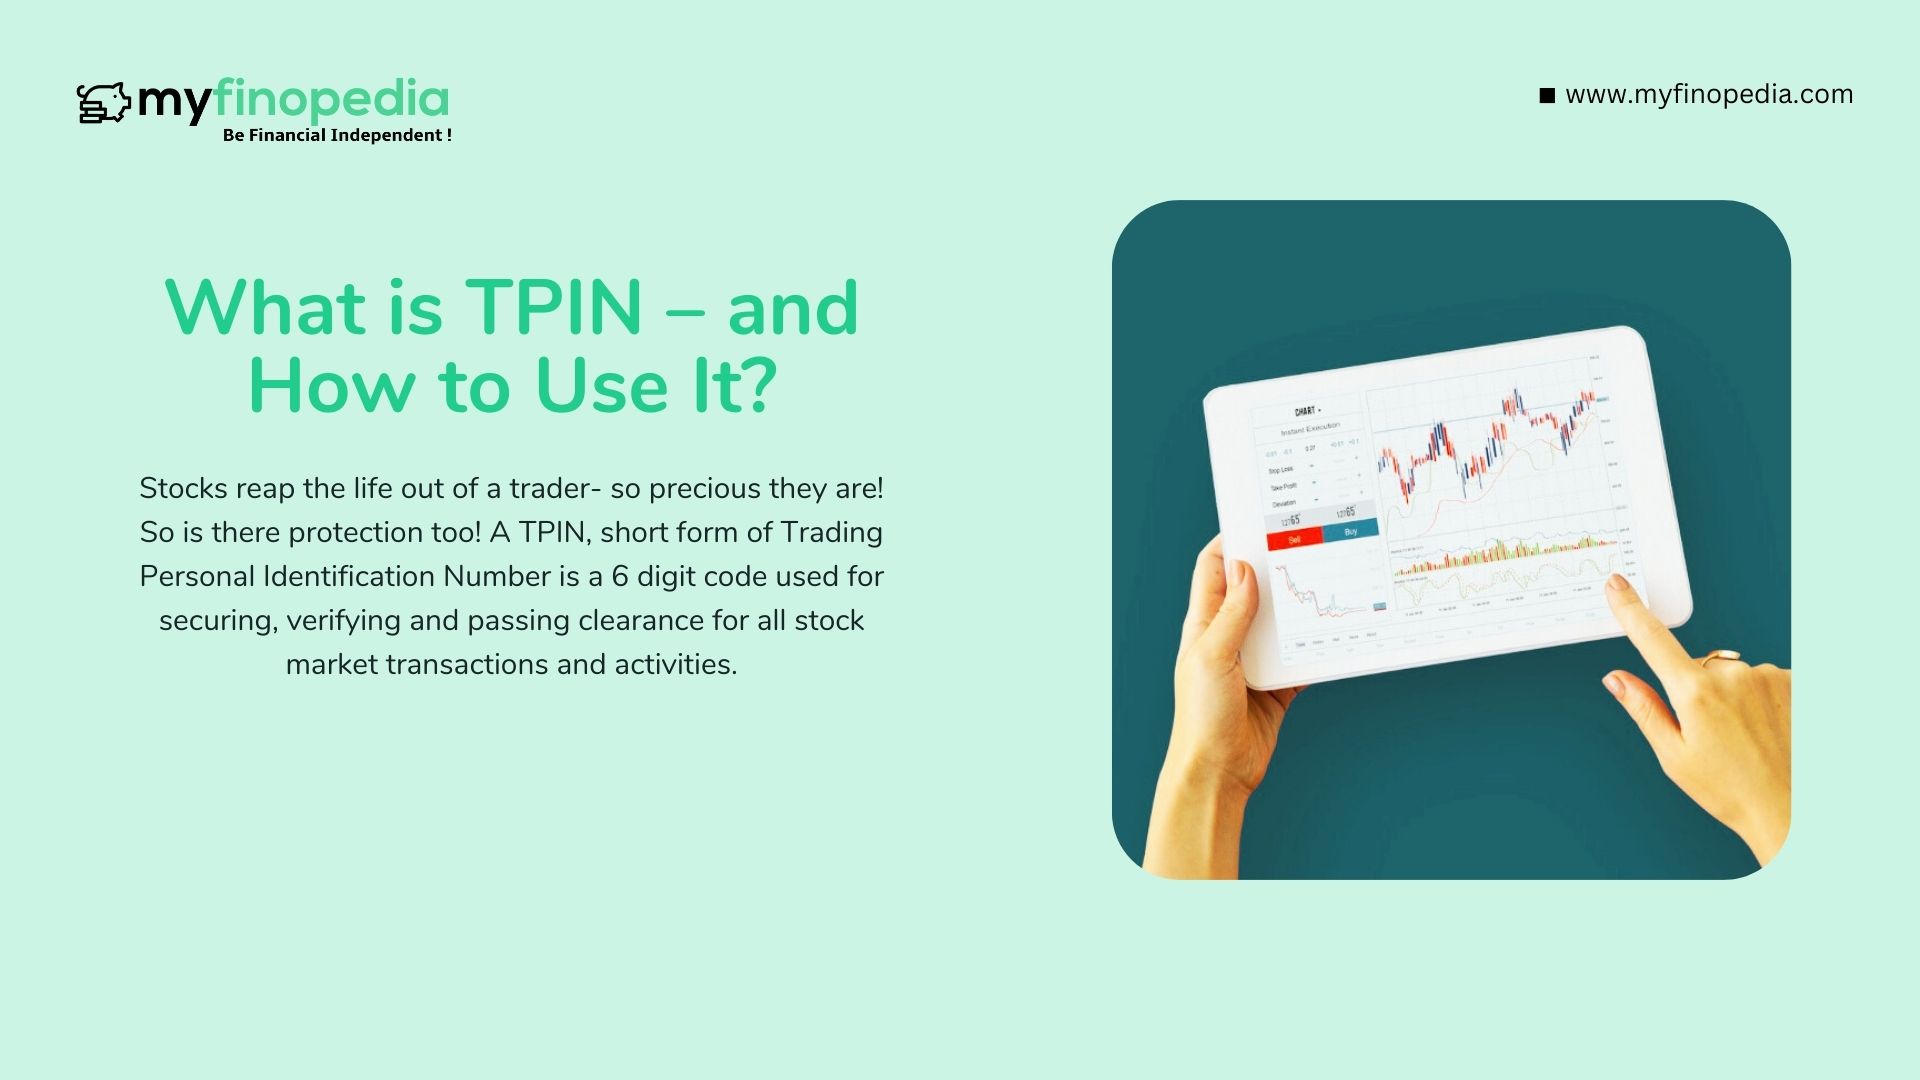 What is TPIN – and How to Use It